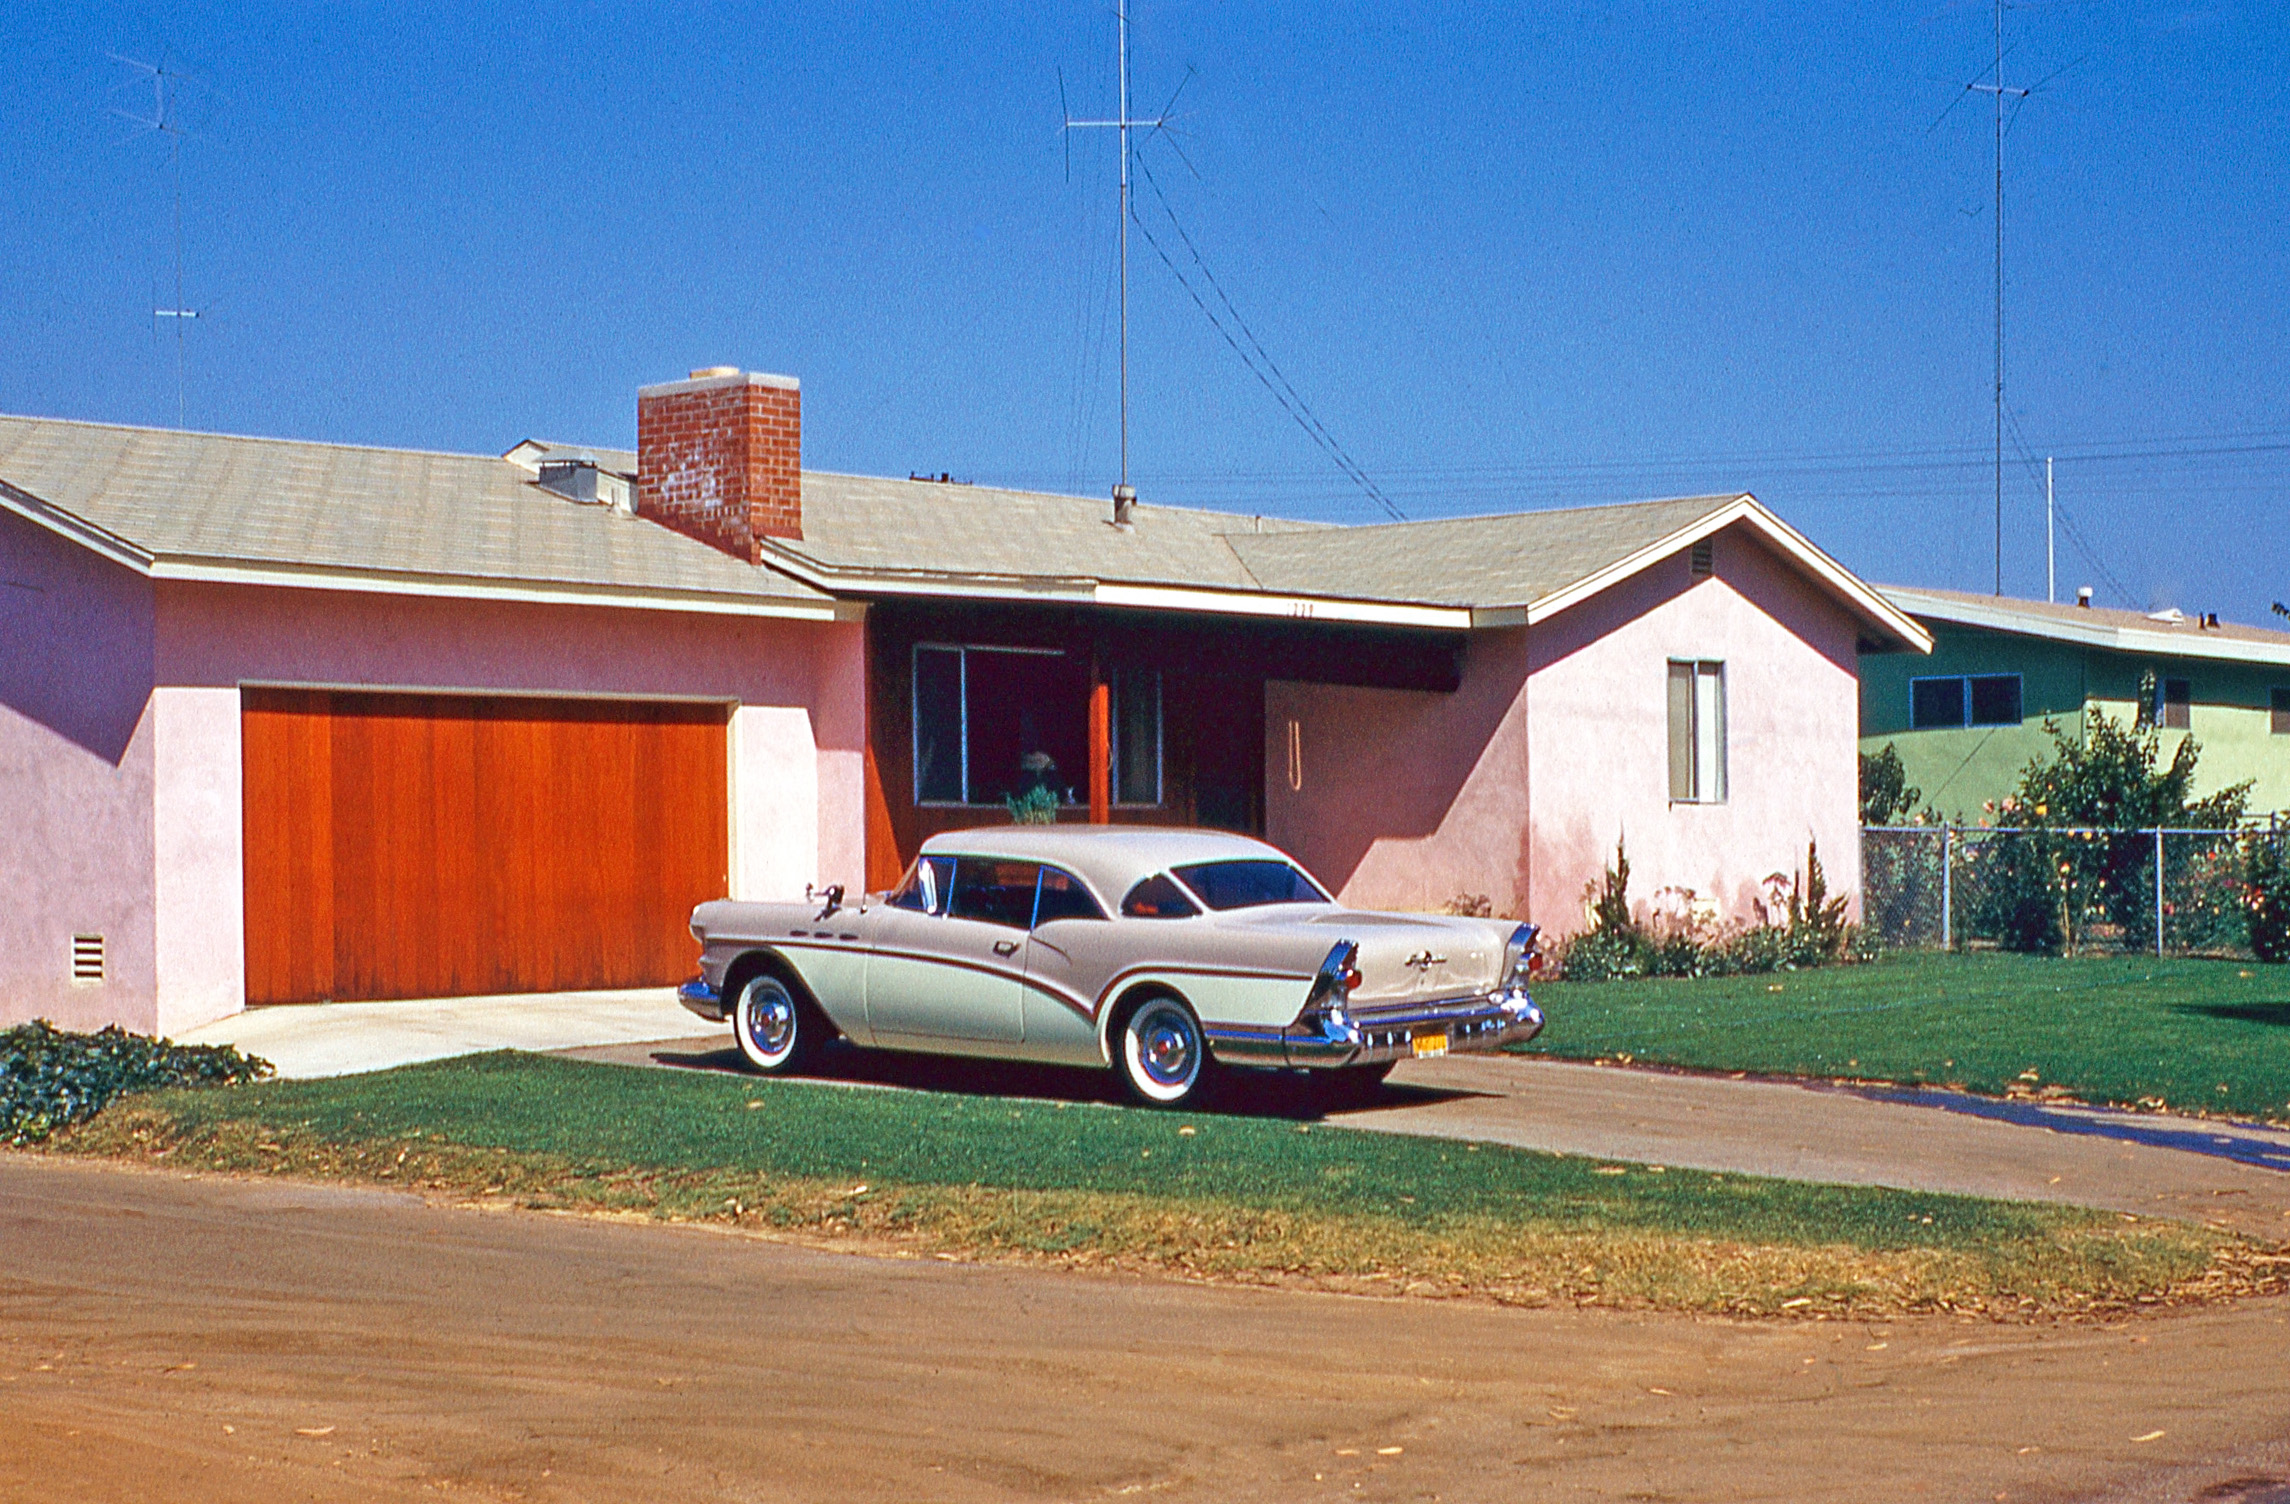 A 1957 Buick, houses in colors not seen anymore, and lots of antennas. A 35mm Kodachrome slide I found somewhere. View full size.